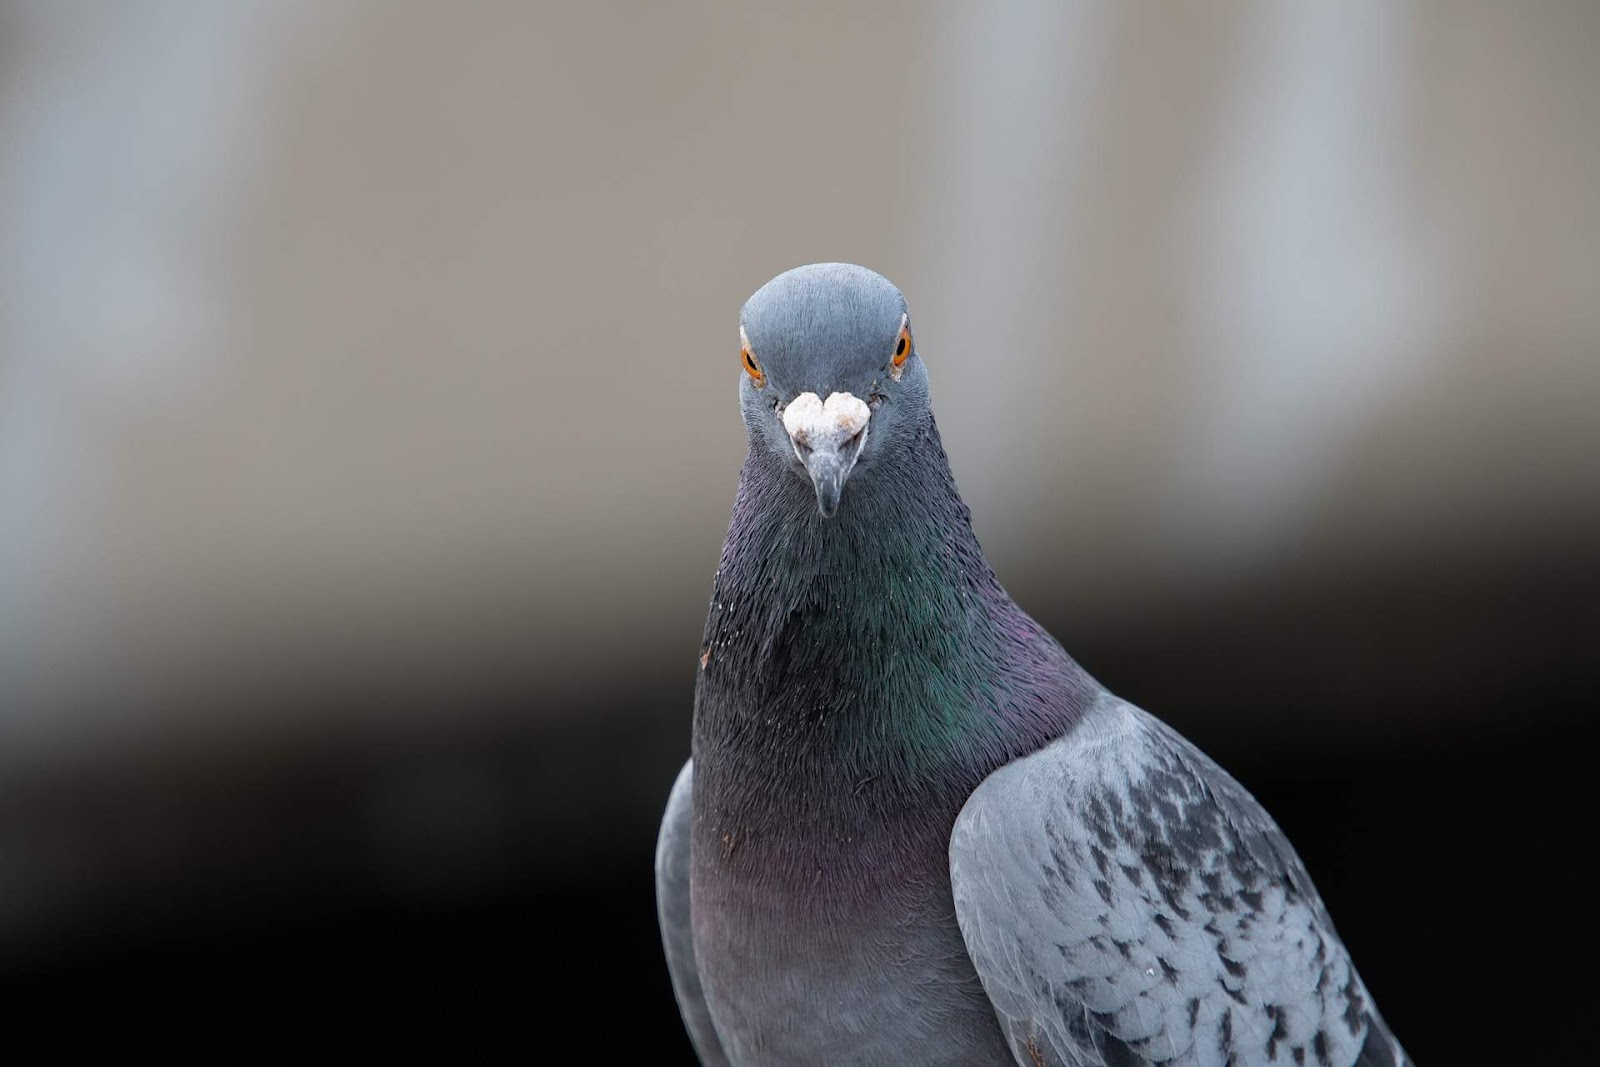 Pigeons, used by the military for spying